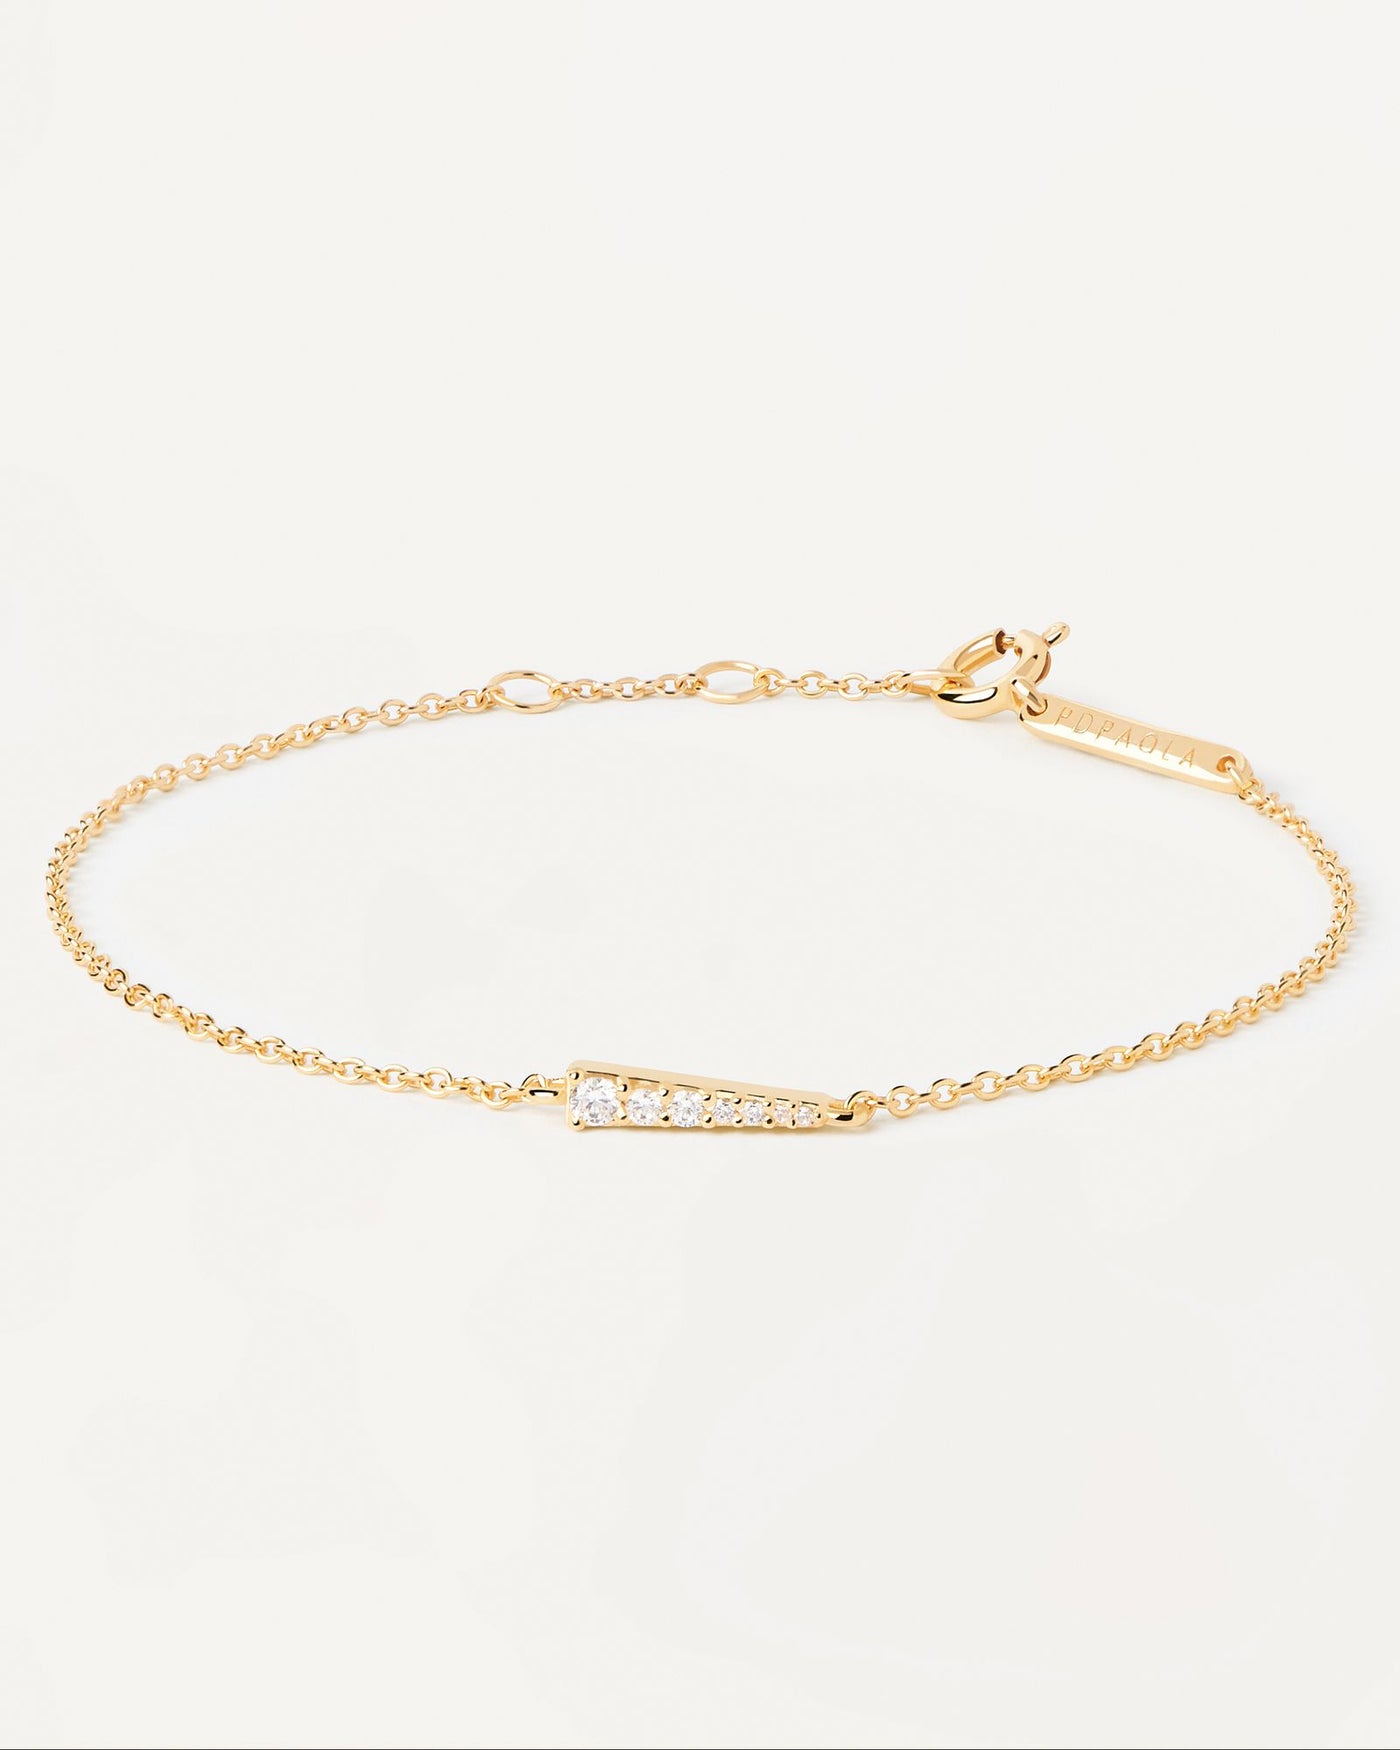 2024 Selection | Peak Bracelet. Gold-plated silver bracelet with white zirconia motive in tip shape. Get the latest arrival from PDPAOLA. Place your order safely and get this Best Seller. Free Shipping.